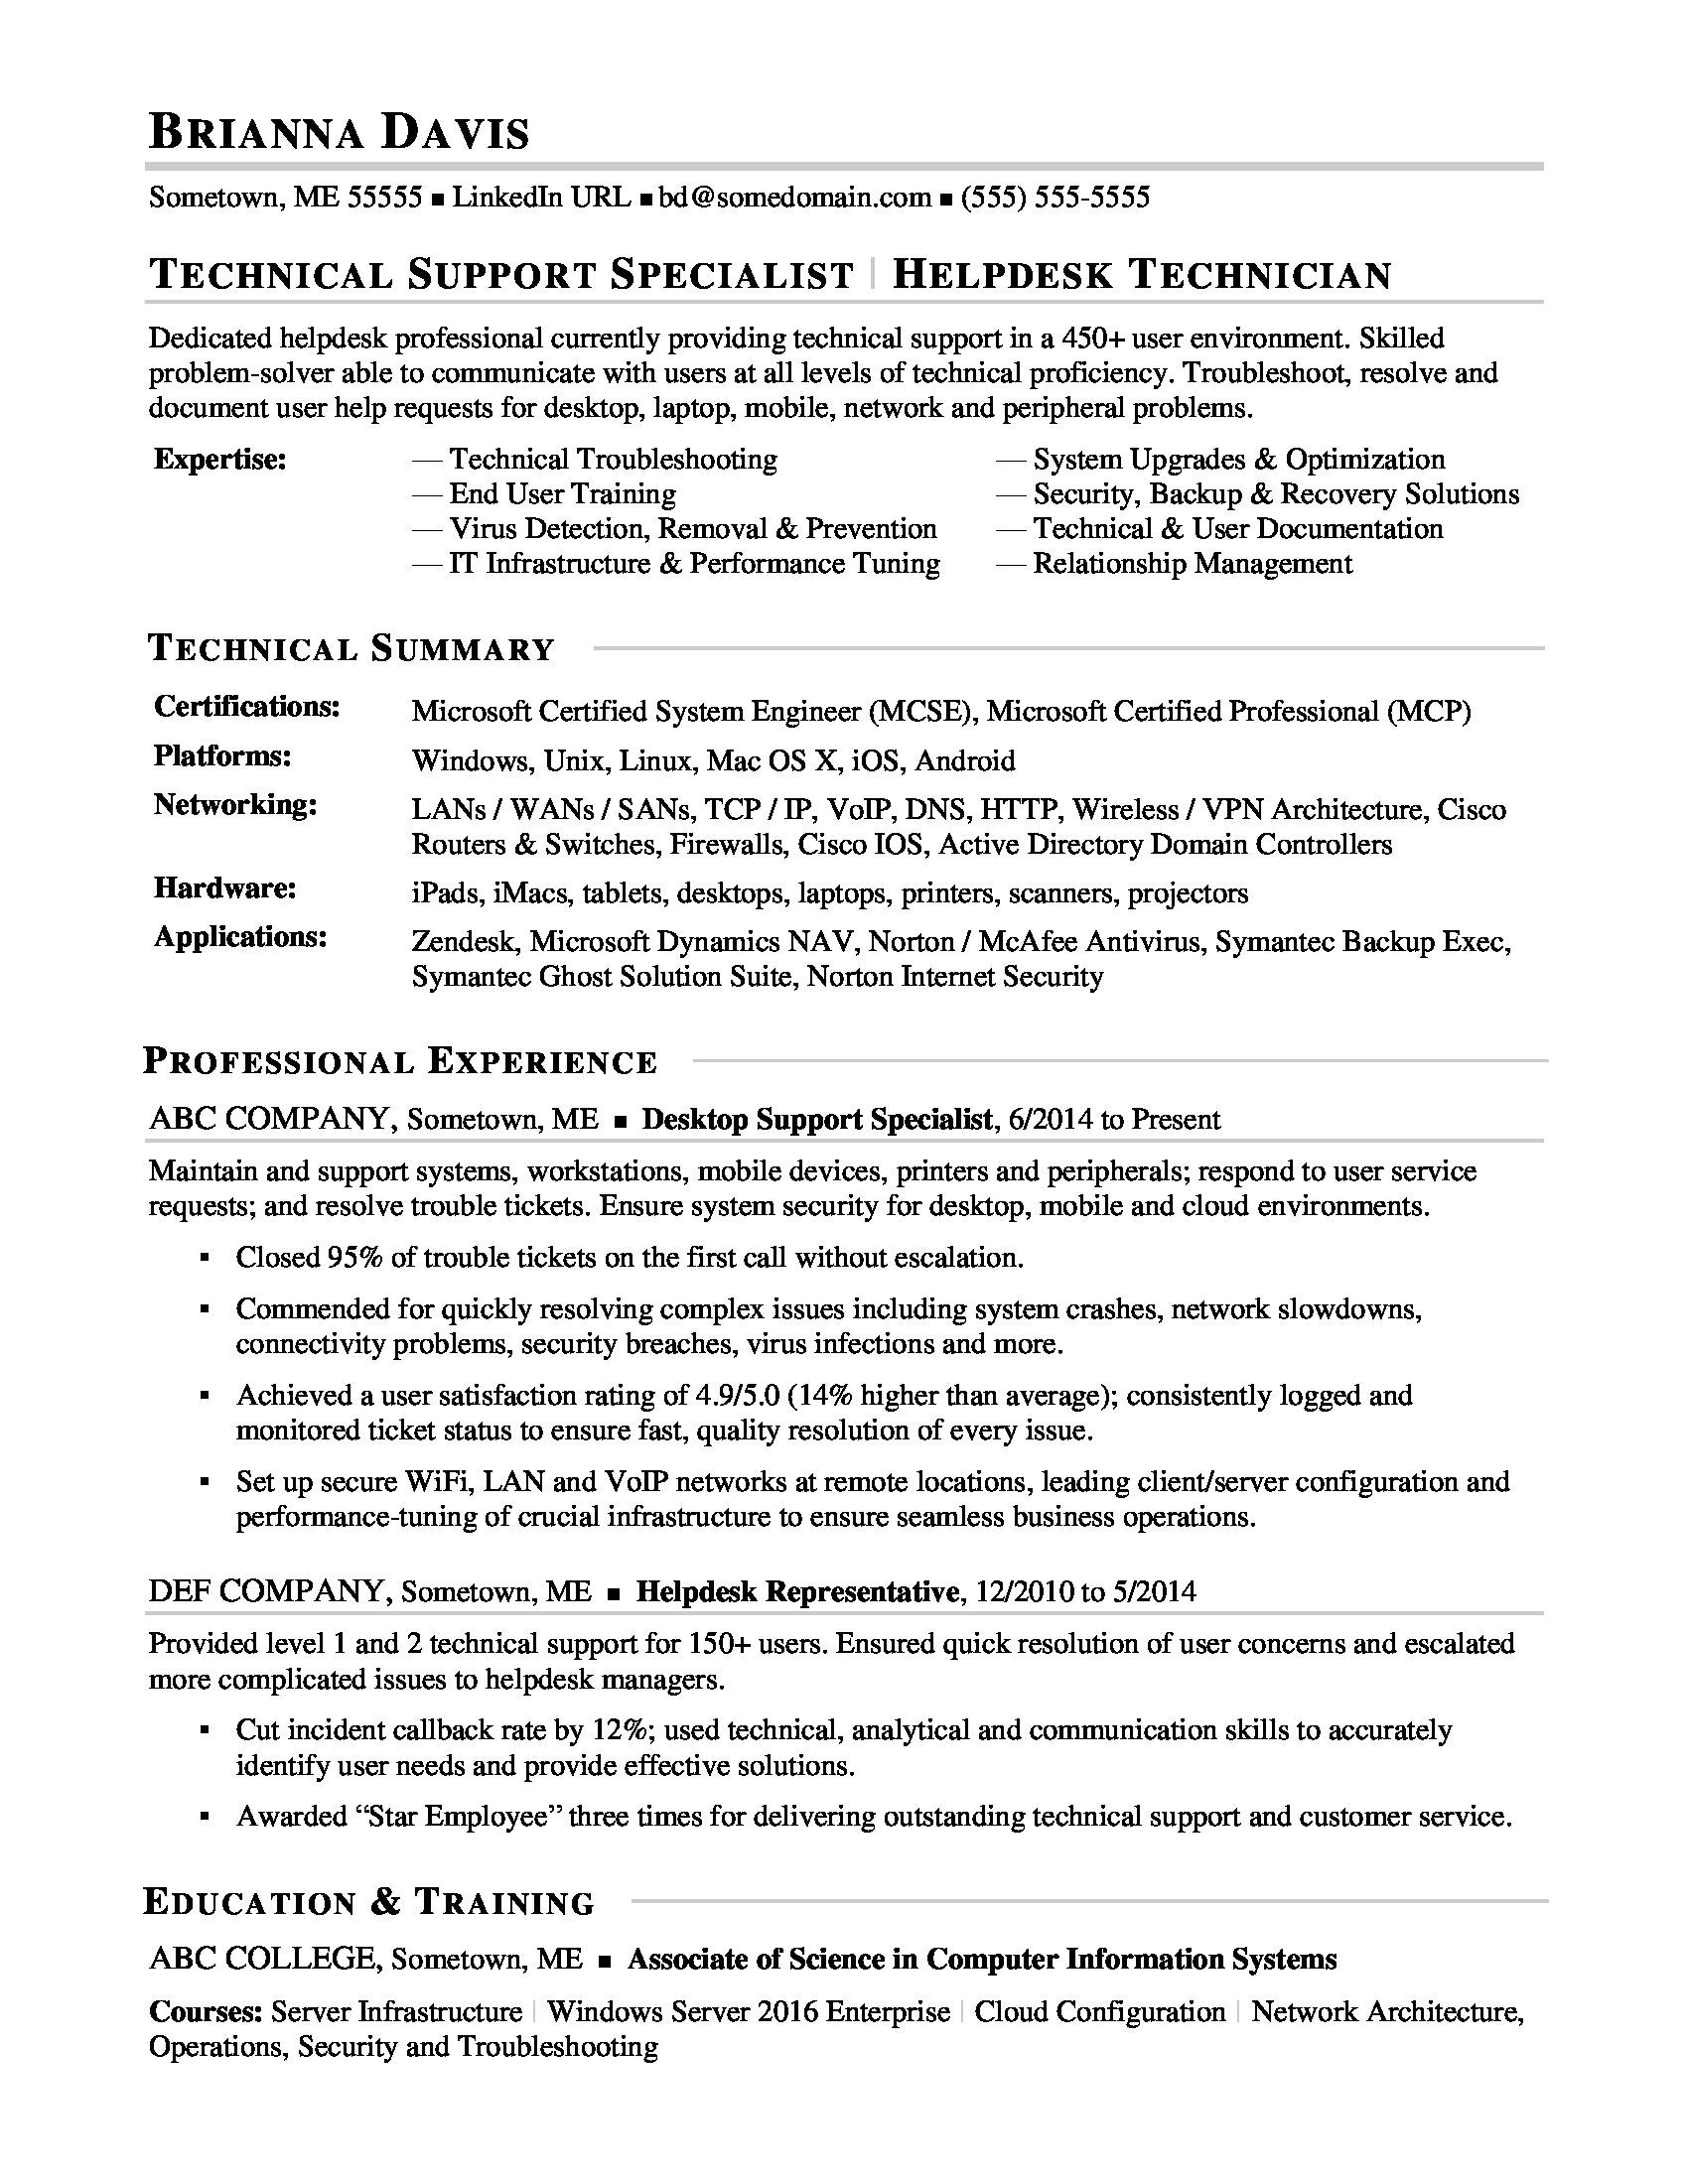 Sample Of Help Desk Resume Summary Of Qualications Sample Resume for Experienced It Help Desk Employee Monster.com